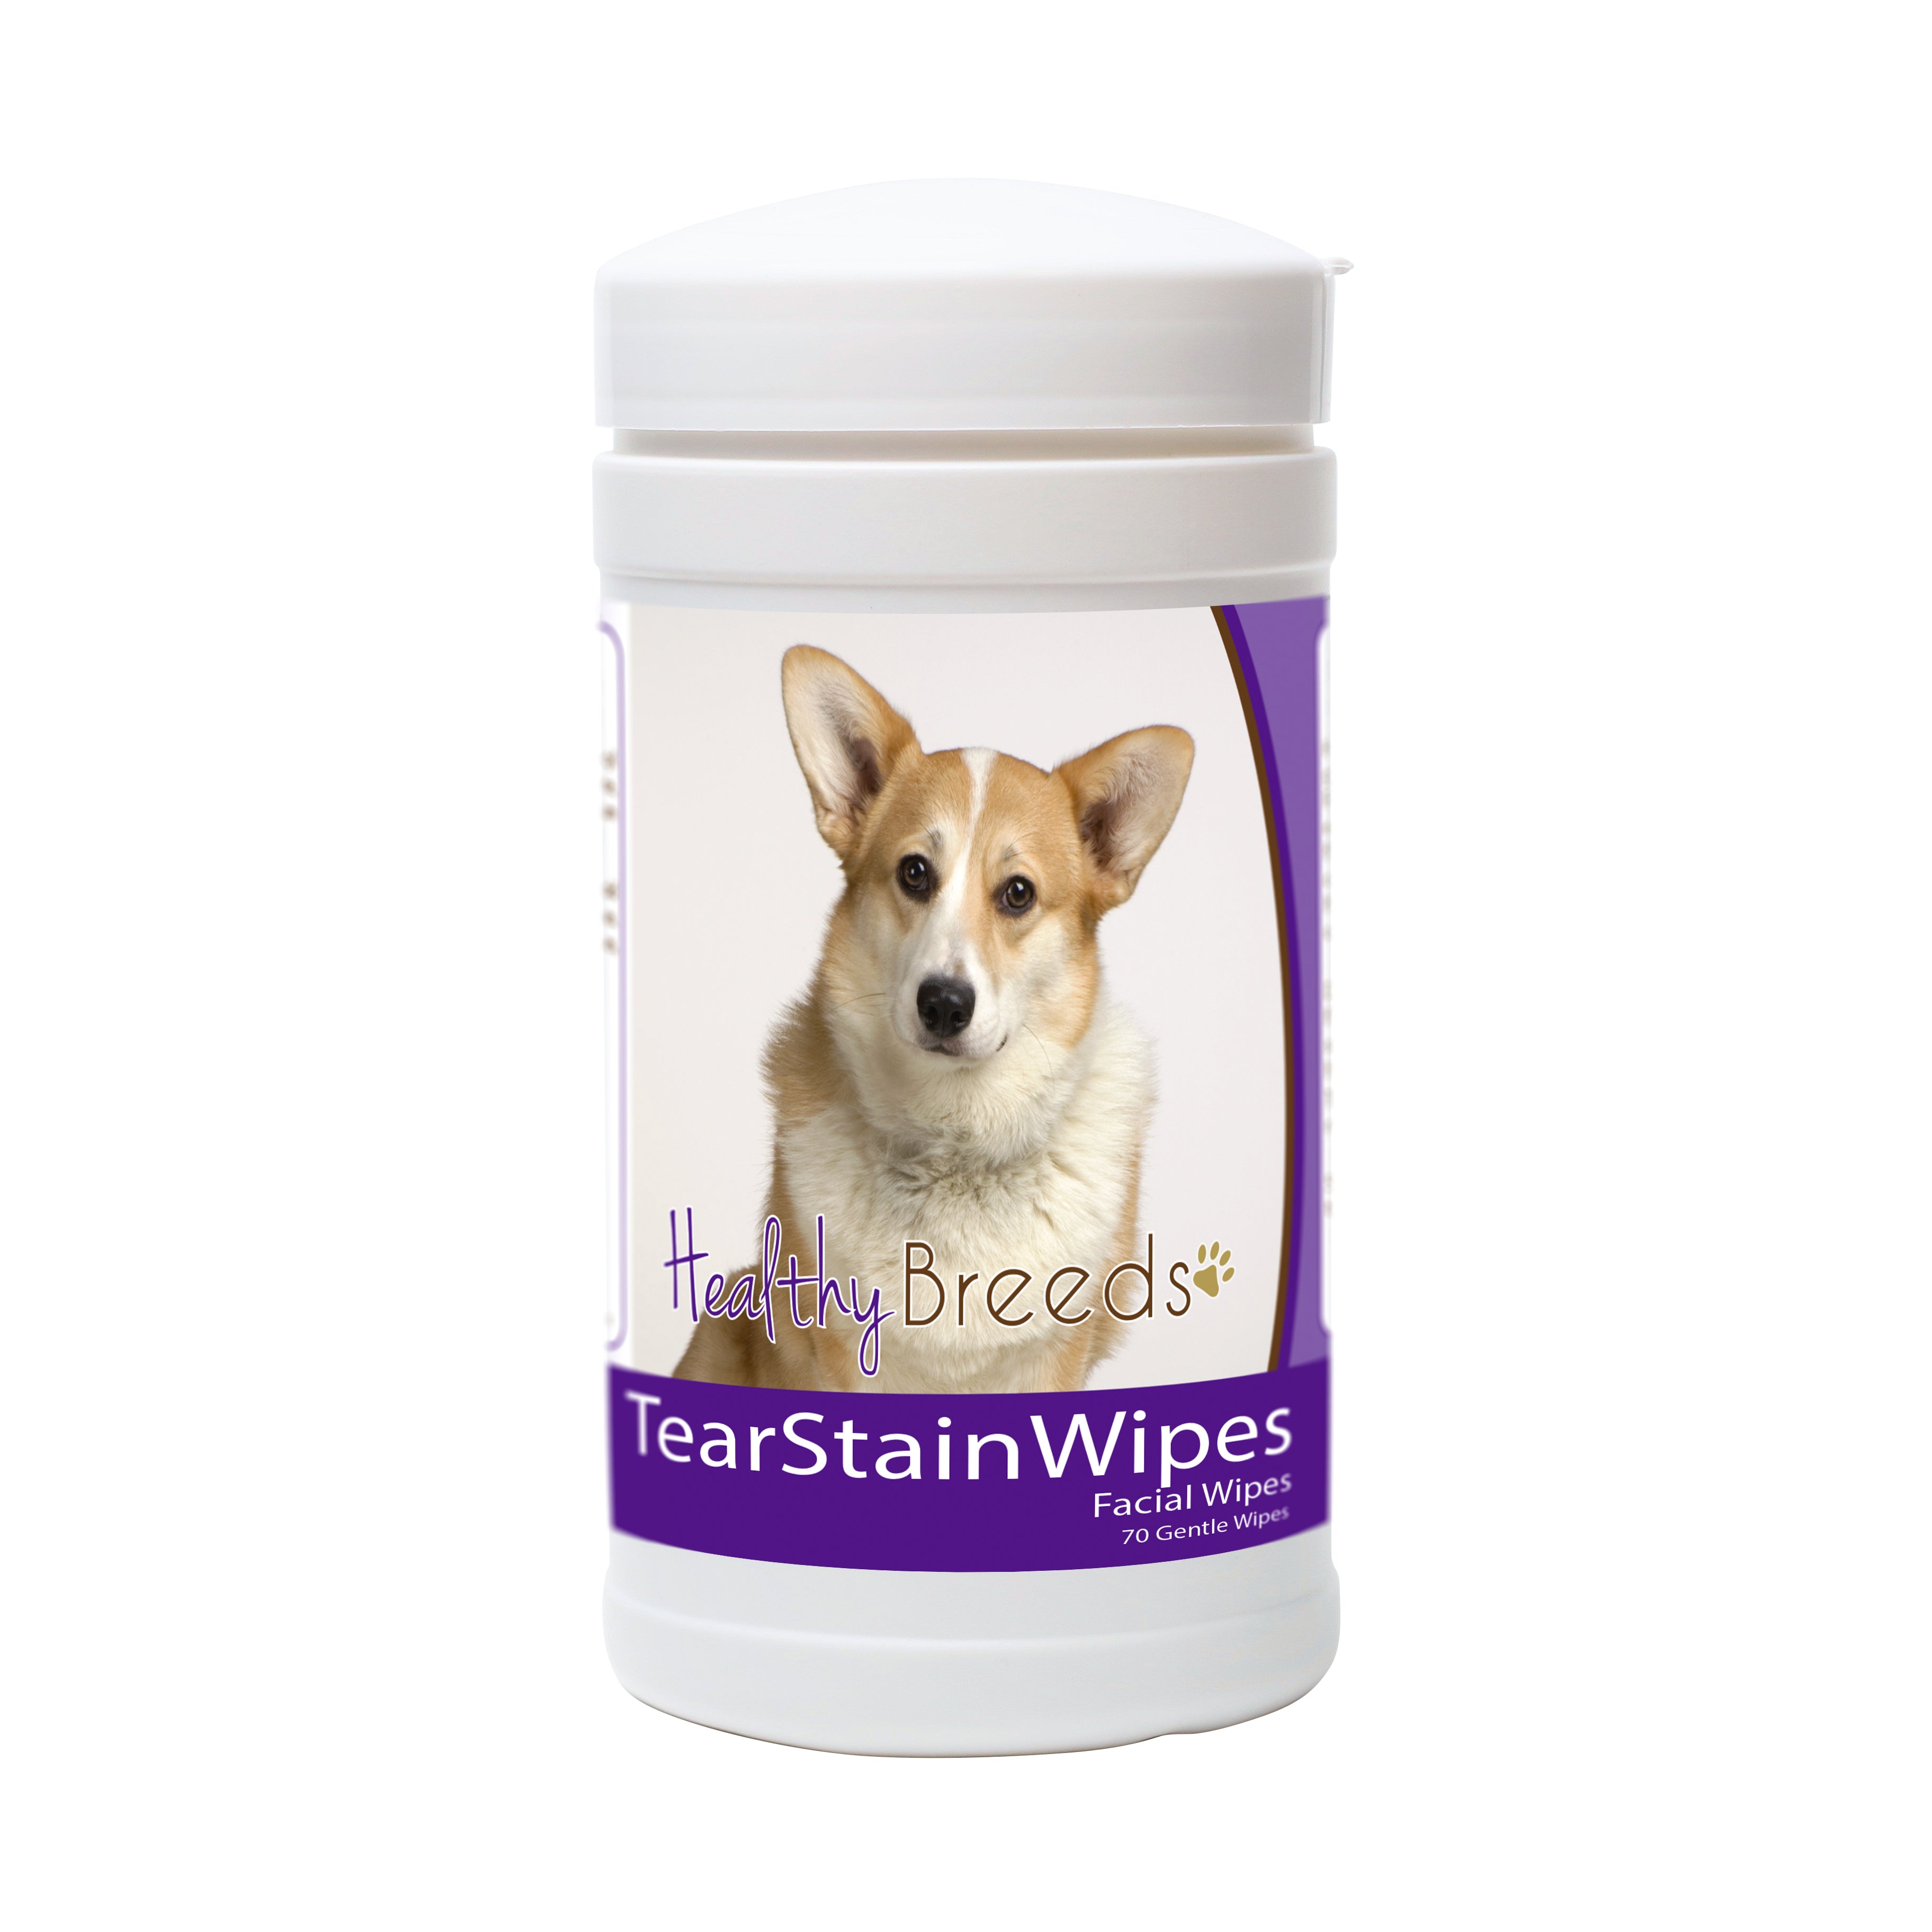 Cardigan Welsh Corgi Tear Stain Wipes 70 Count